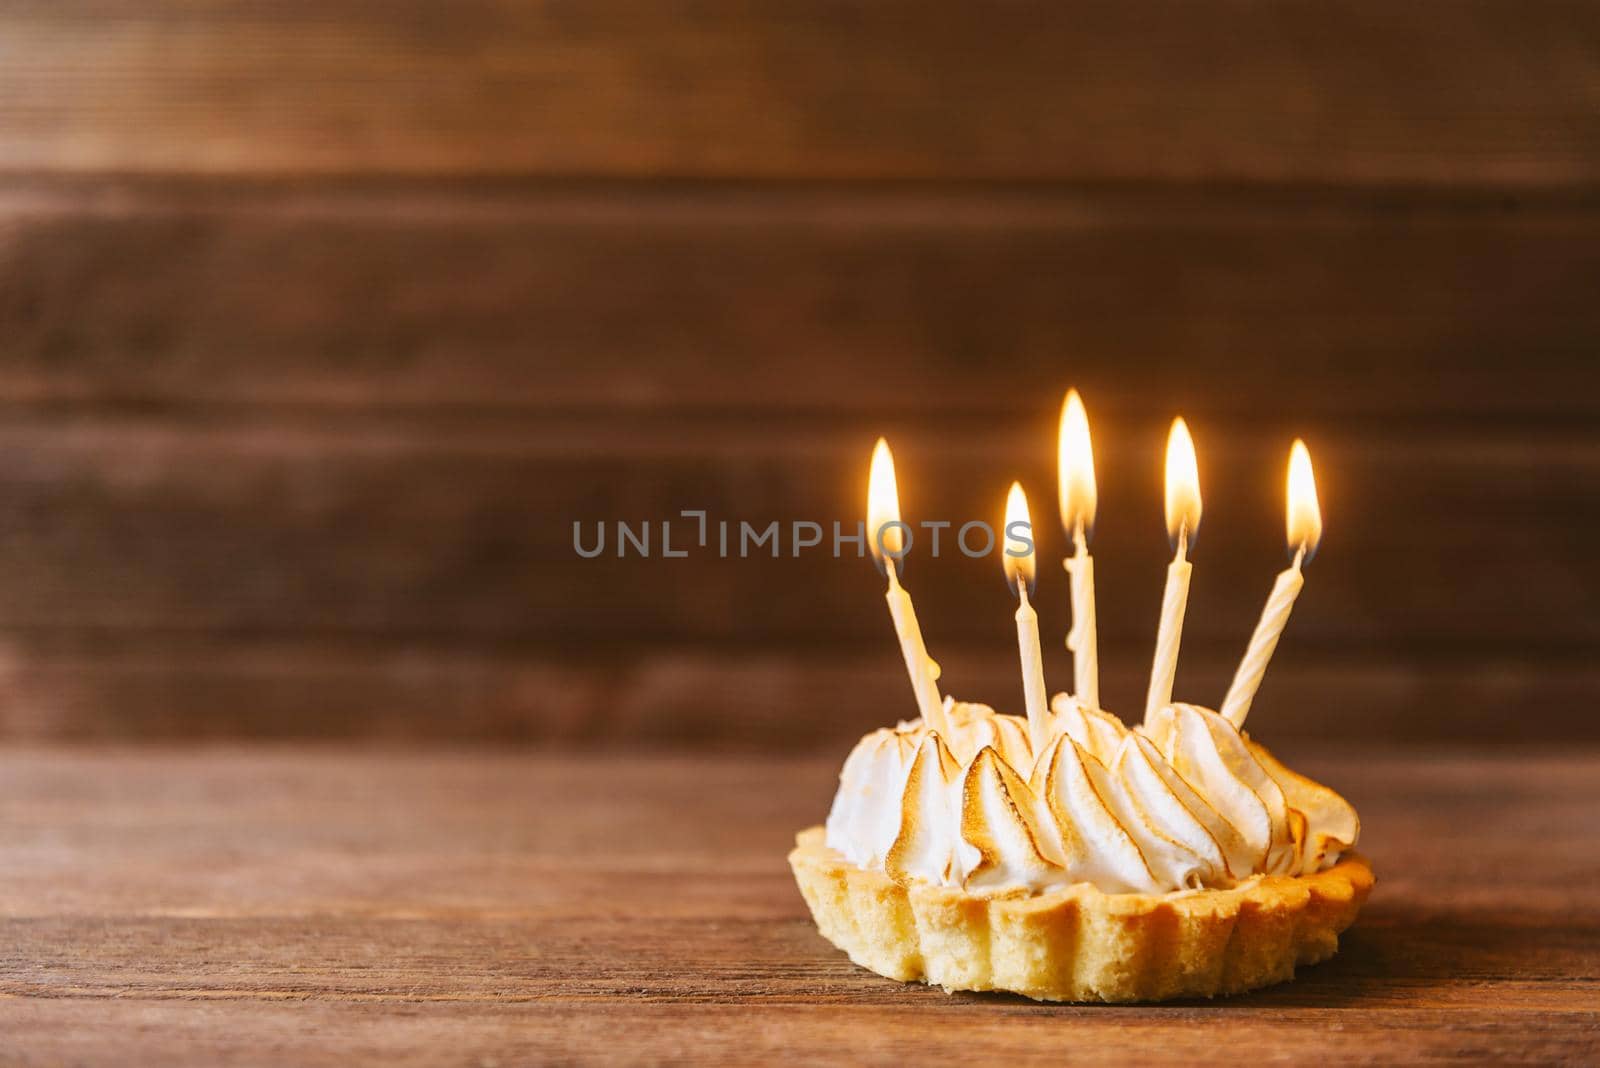 Birthday cake with five candles on a wooden background. Copy-space in left part of image.